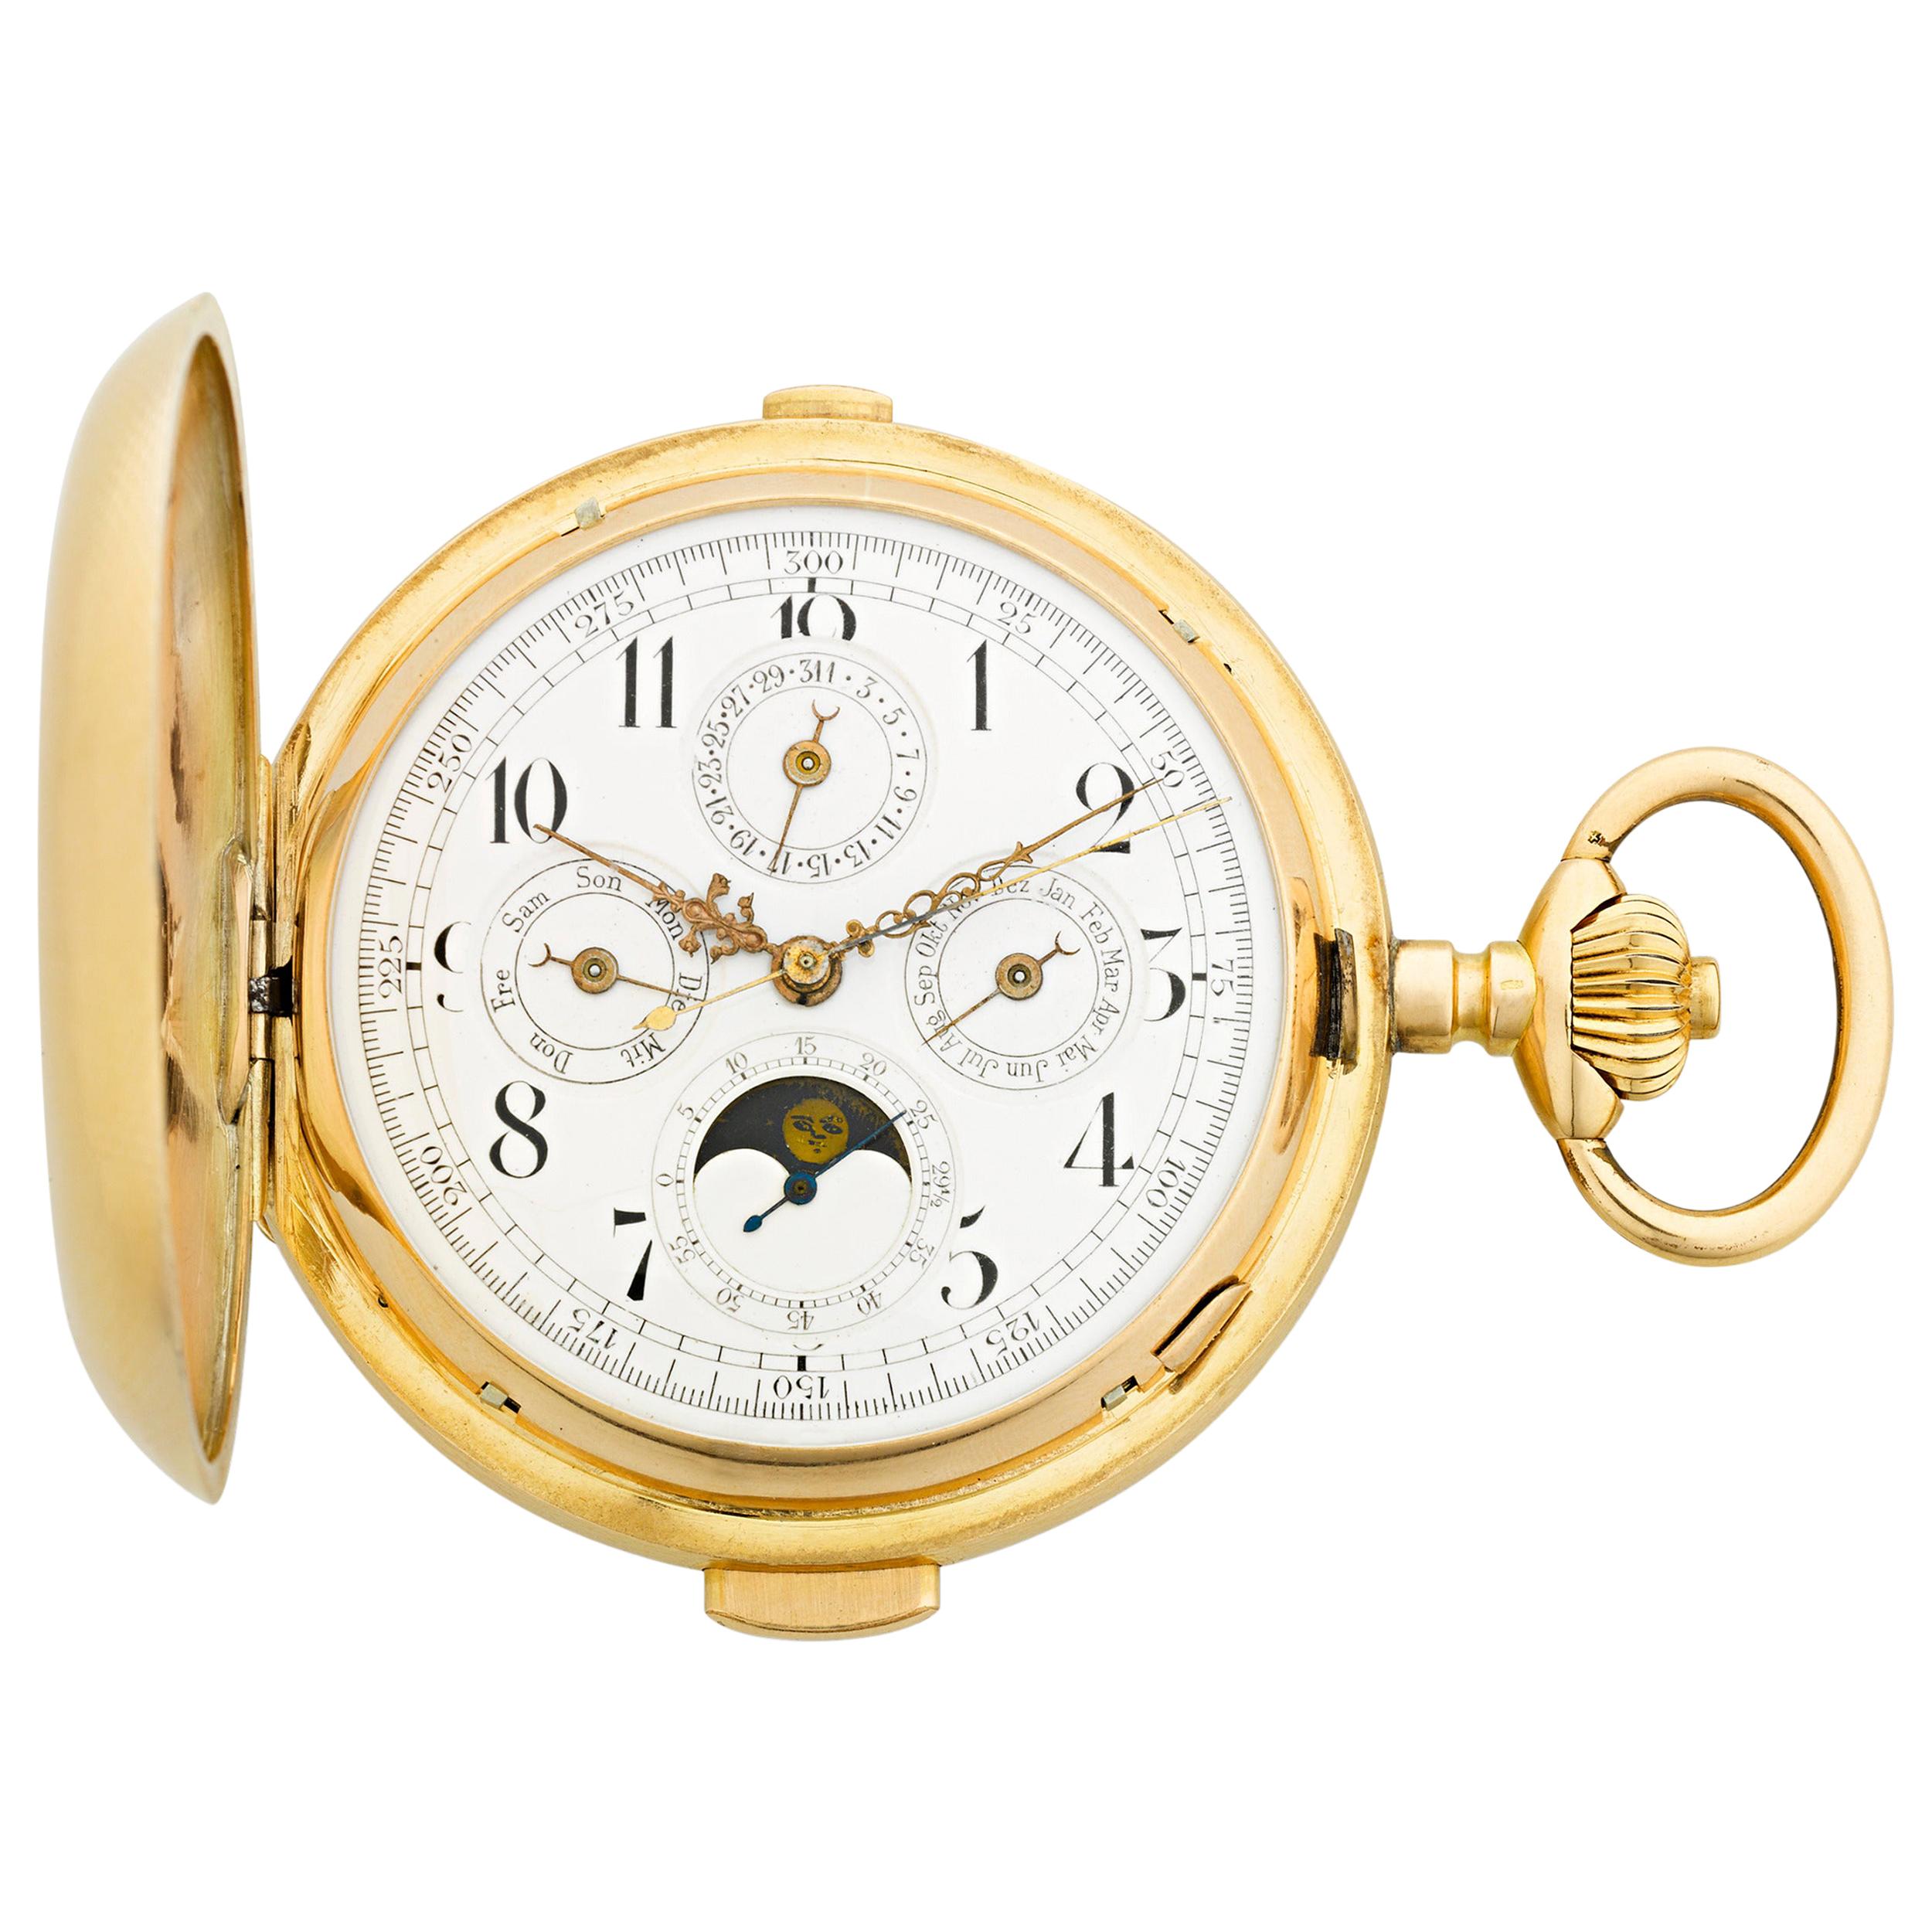 Fabrique Germinal Triple-Date Chronograph Pocket Watch by Picard & Cie.